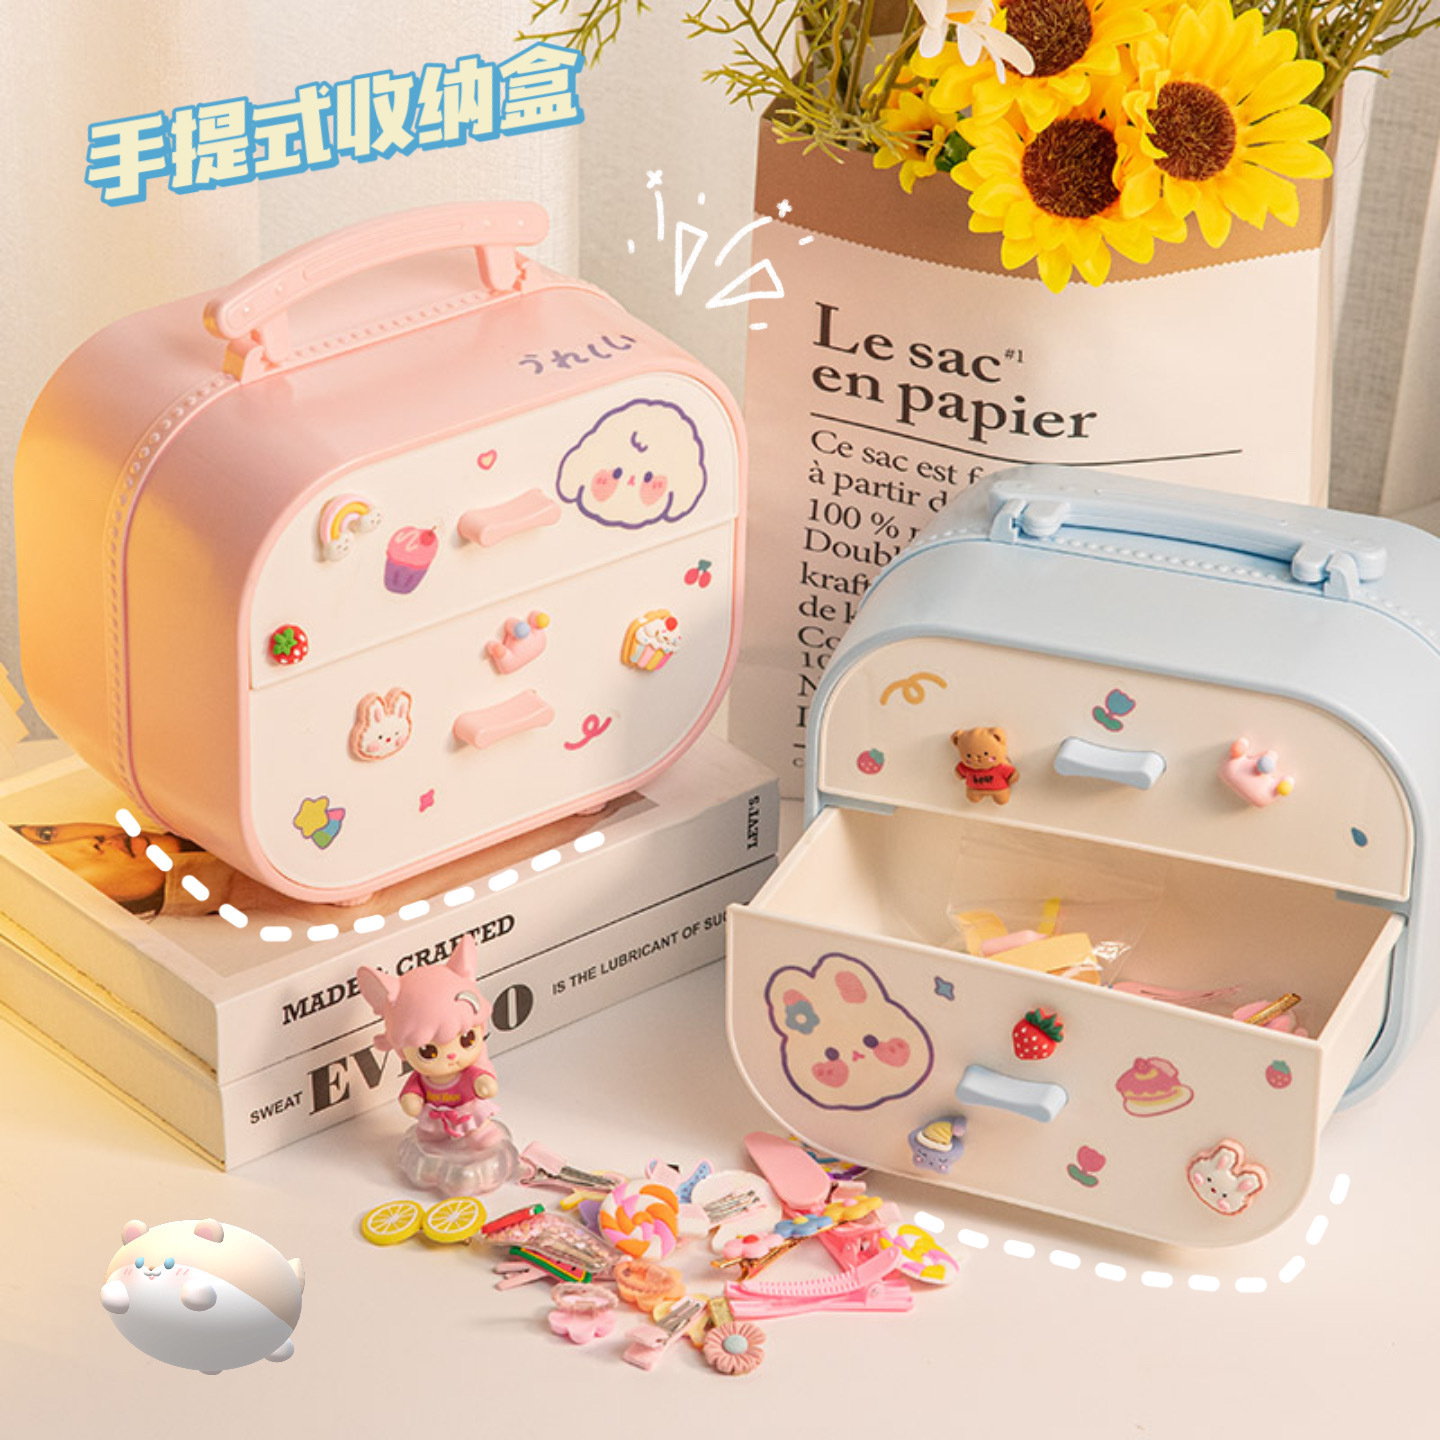 New Accessories Storage Box Jewelry Desktop Cosmetic Case Dormitory Girl Student Drawer Desk Stationery Box